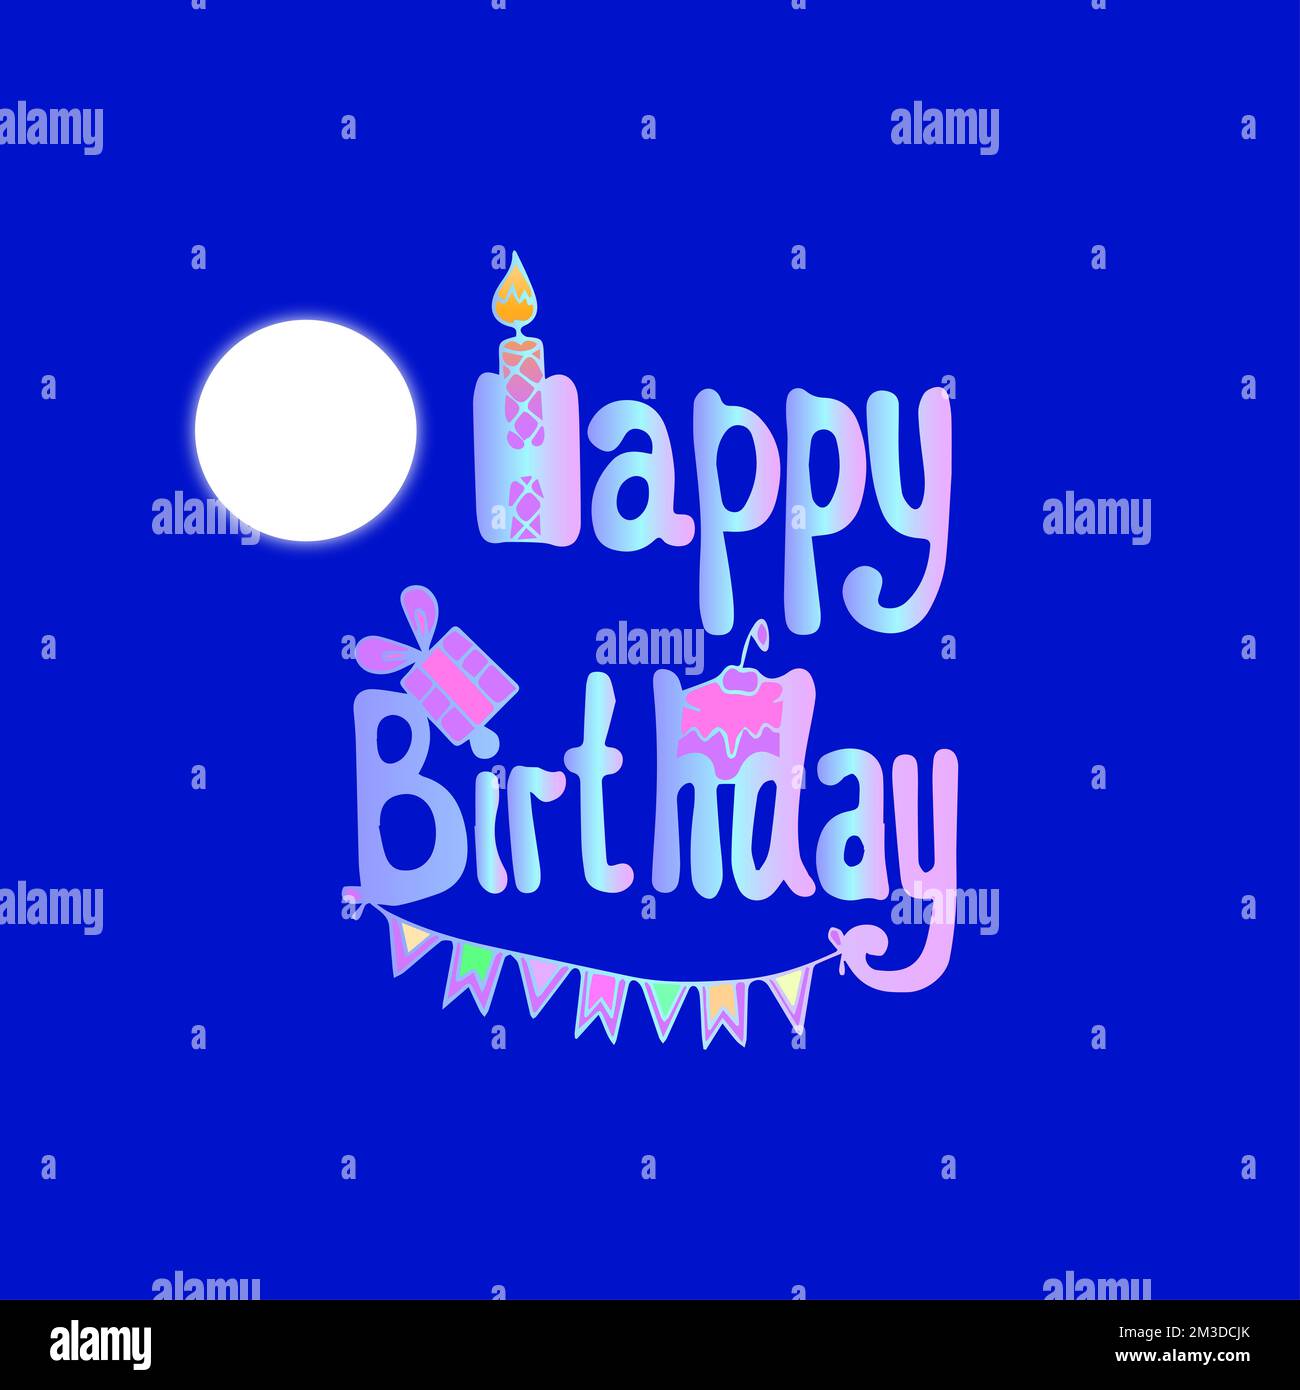 Happy birthday beautiful and colorful text design and blue background-01 Stock Photo